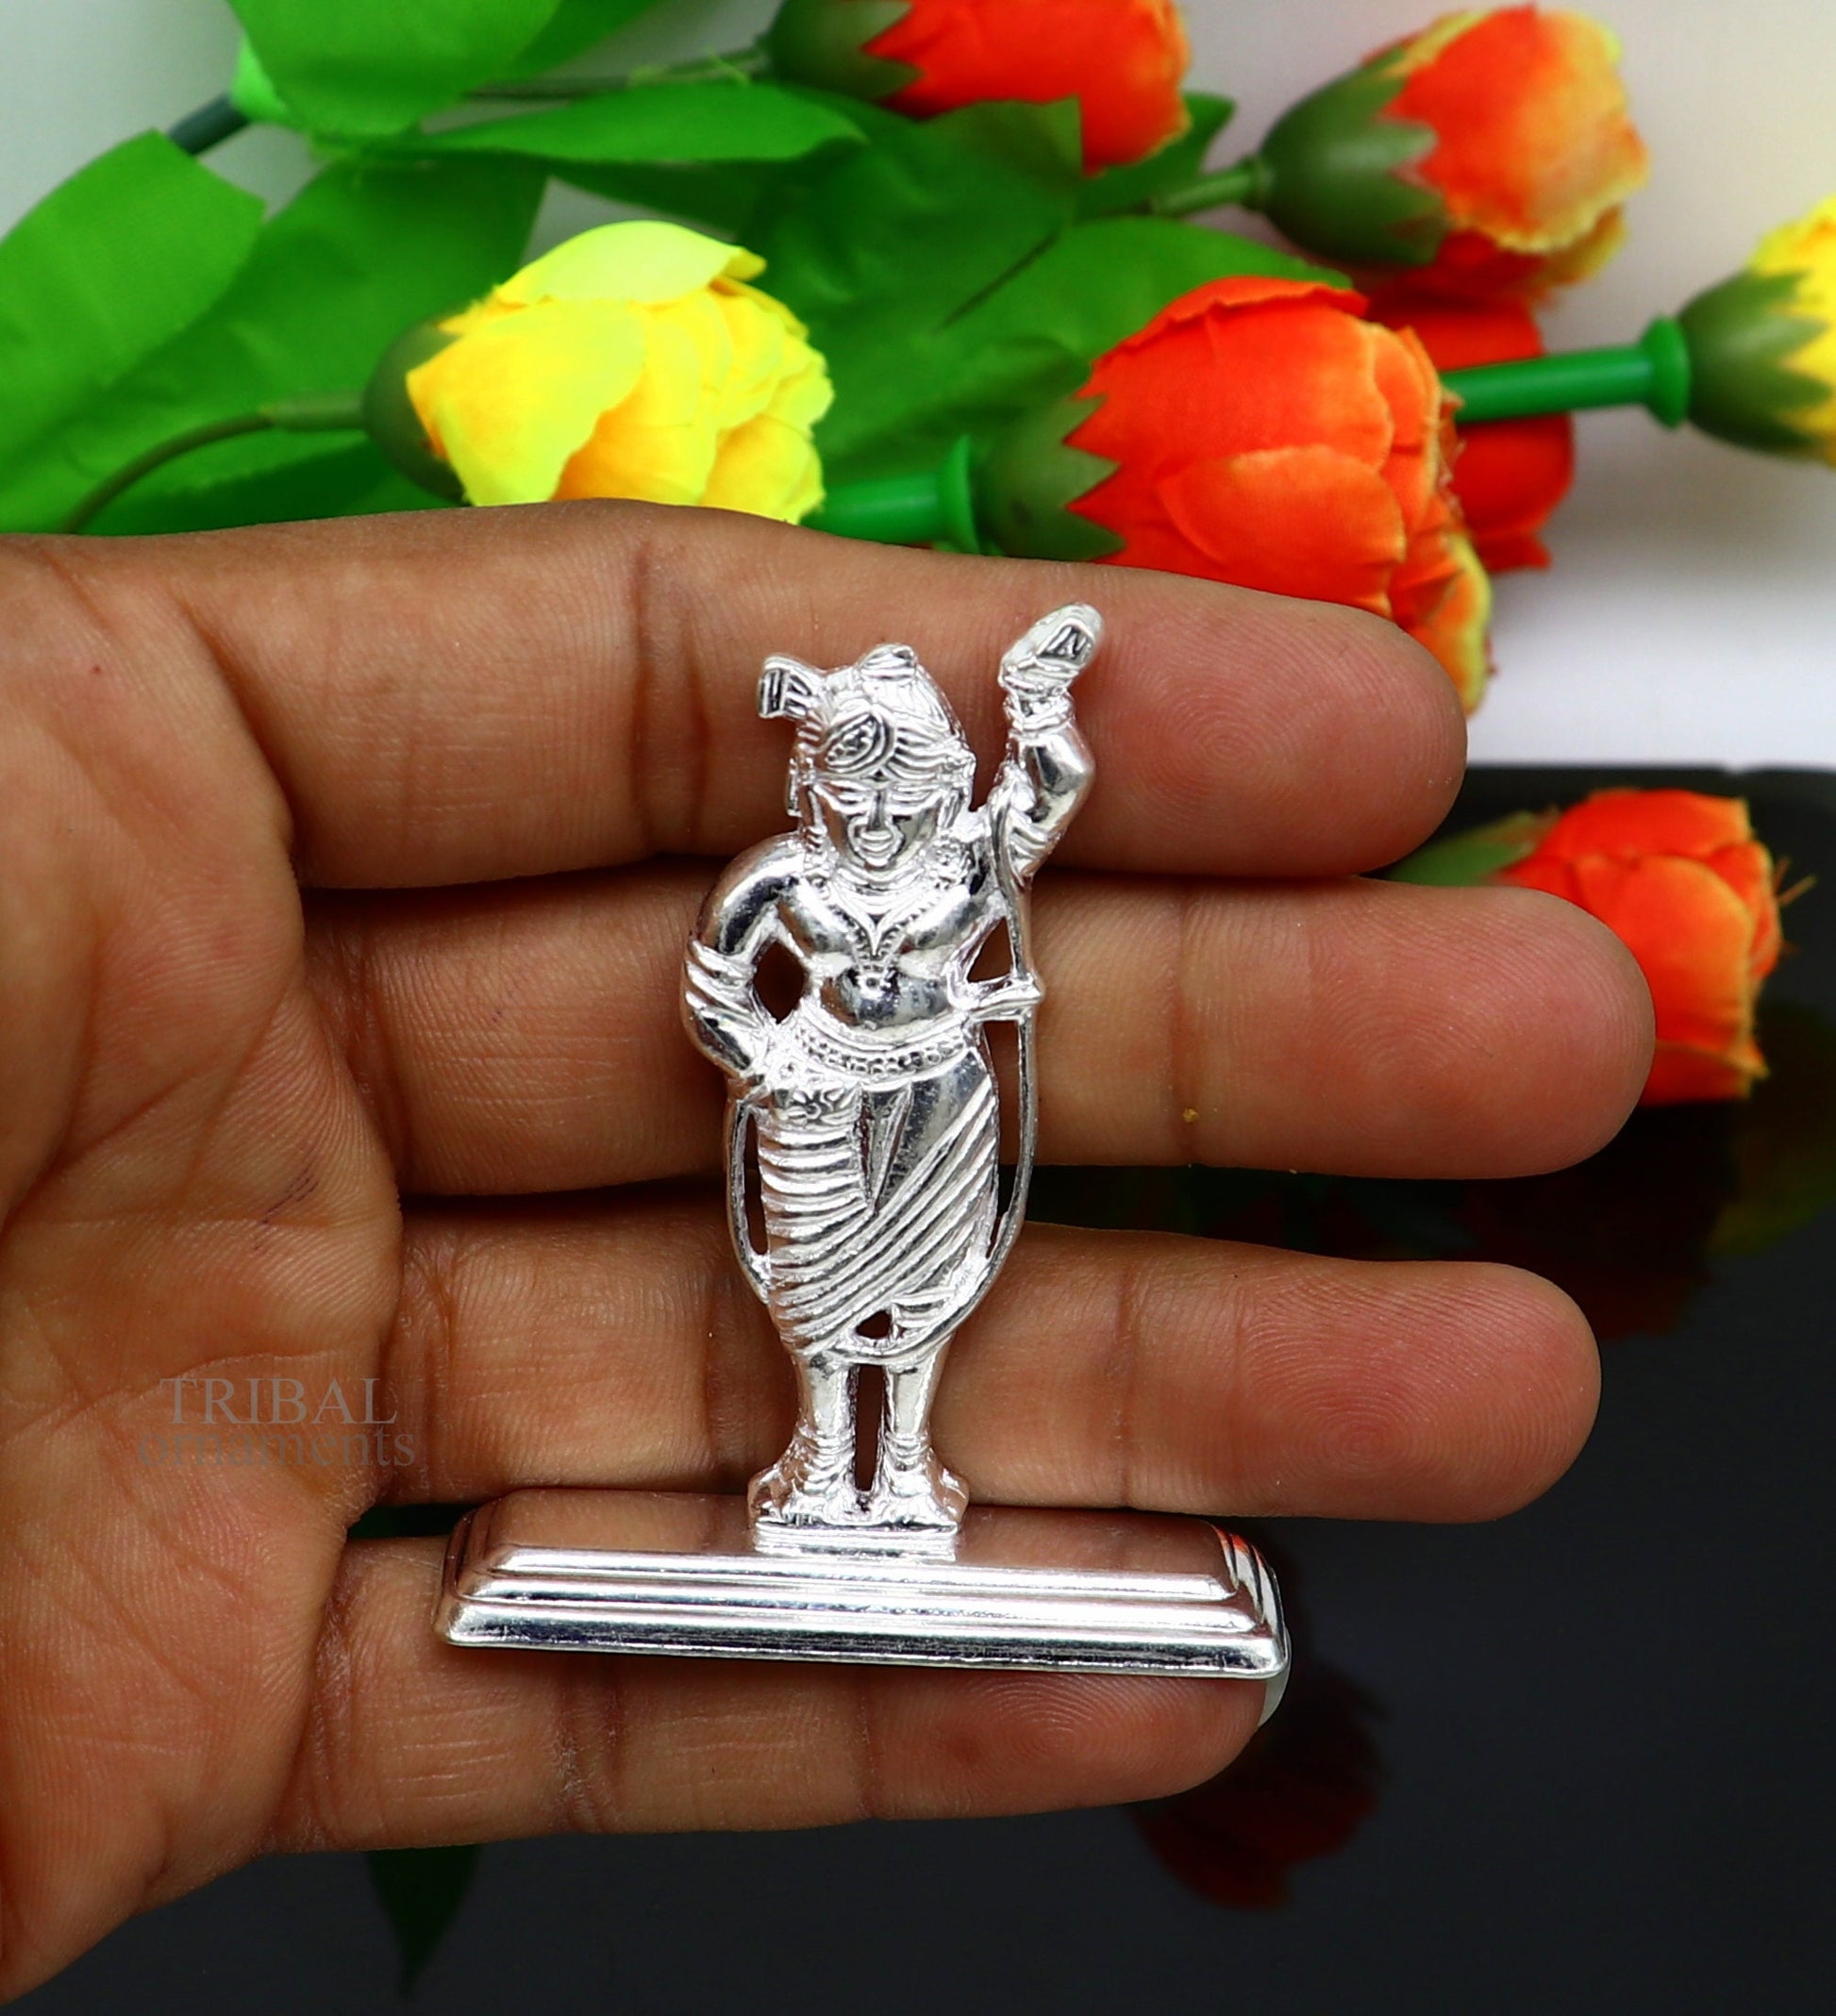 Silver lord krishna narayan avtar shri Nathji statue figurine, solid silver article, best gift for décor your car front for blessing art455 - TRIBAL ORNAMENTS